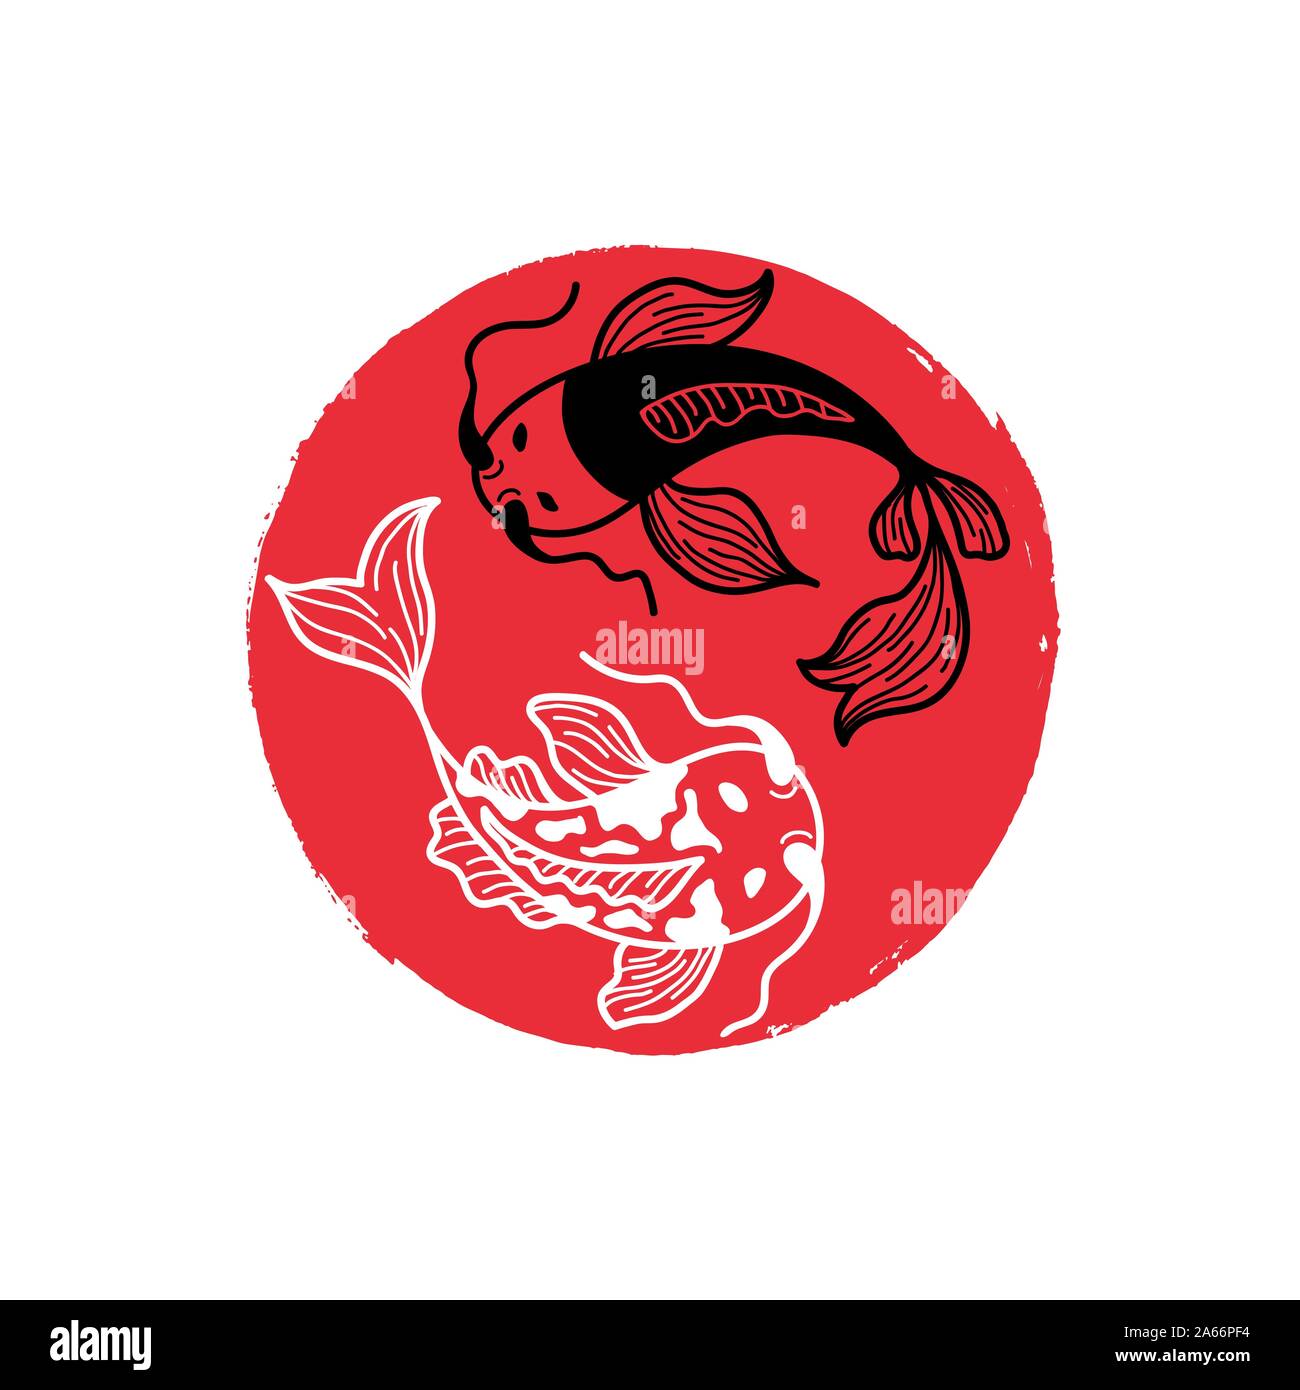 Japanese Carp Koi on the Red Round Brush Spot. Painted Circle Icon. Asian Traditional Symbol with Decorative Fishes. Cover Design for Sushi Restaurant Menu Stock Vector